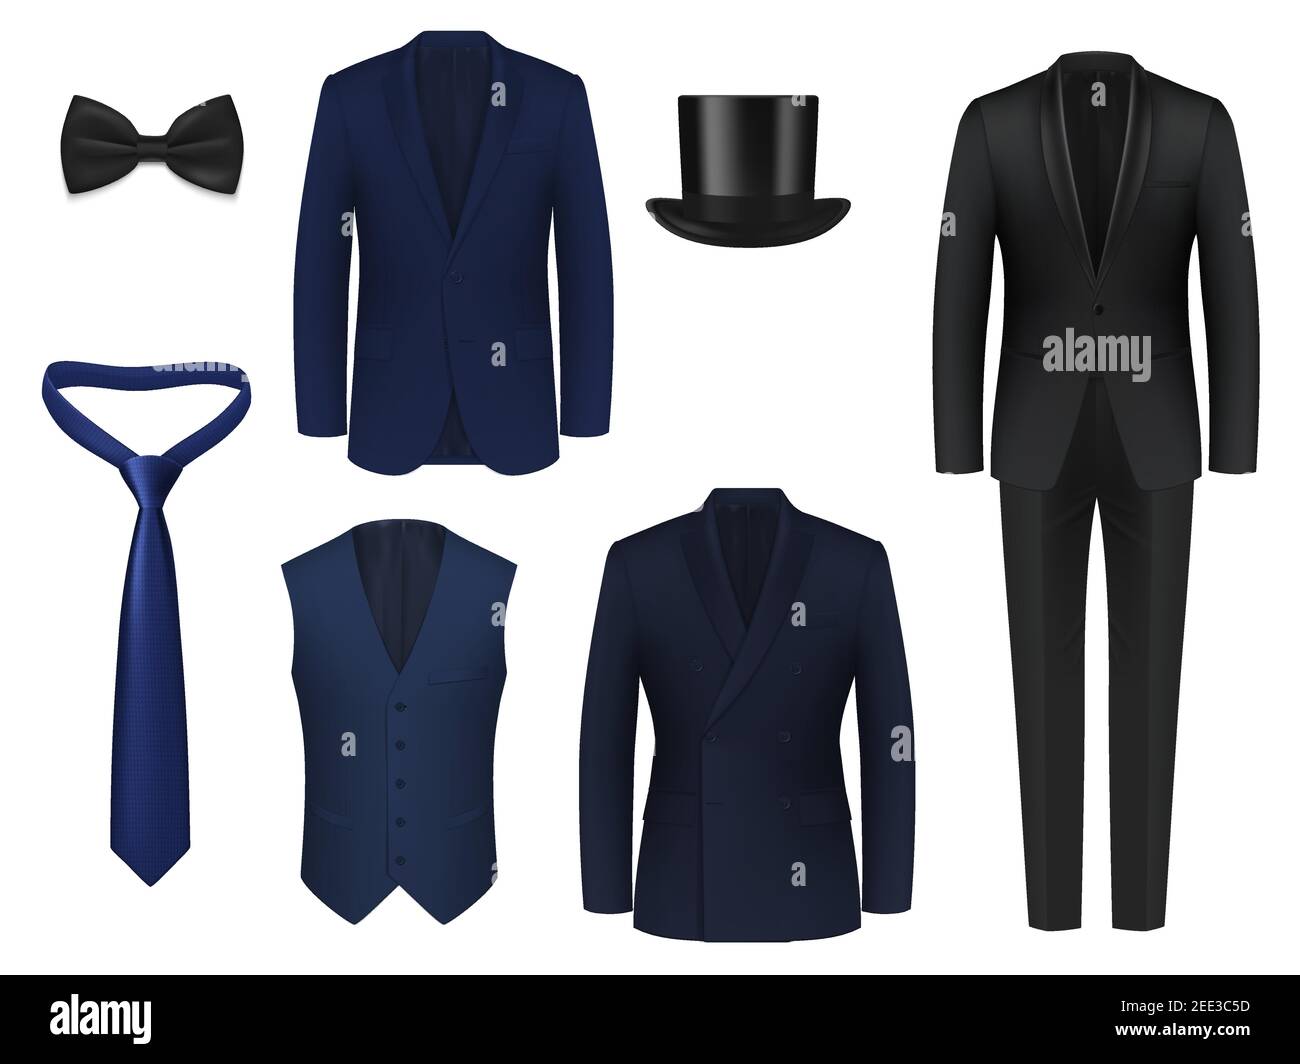 Wedding or dinner mens suit realistic mockup. Blue, black classic tuxedo jackets with single, double breasted tux, shawl collar, peak and shawl lapel, Stock Vector